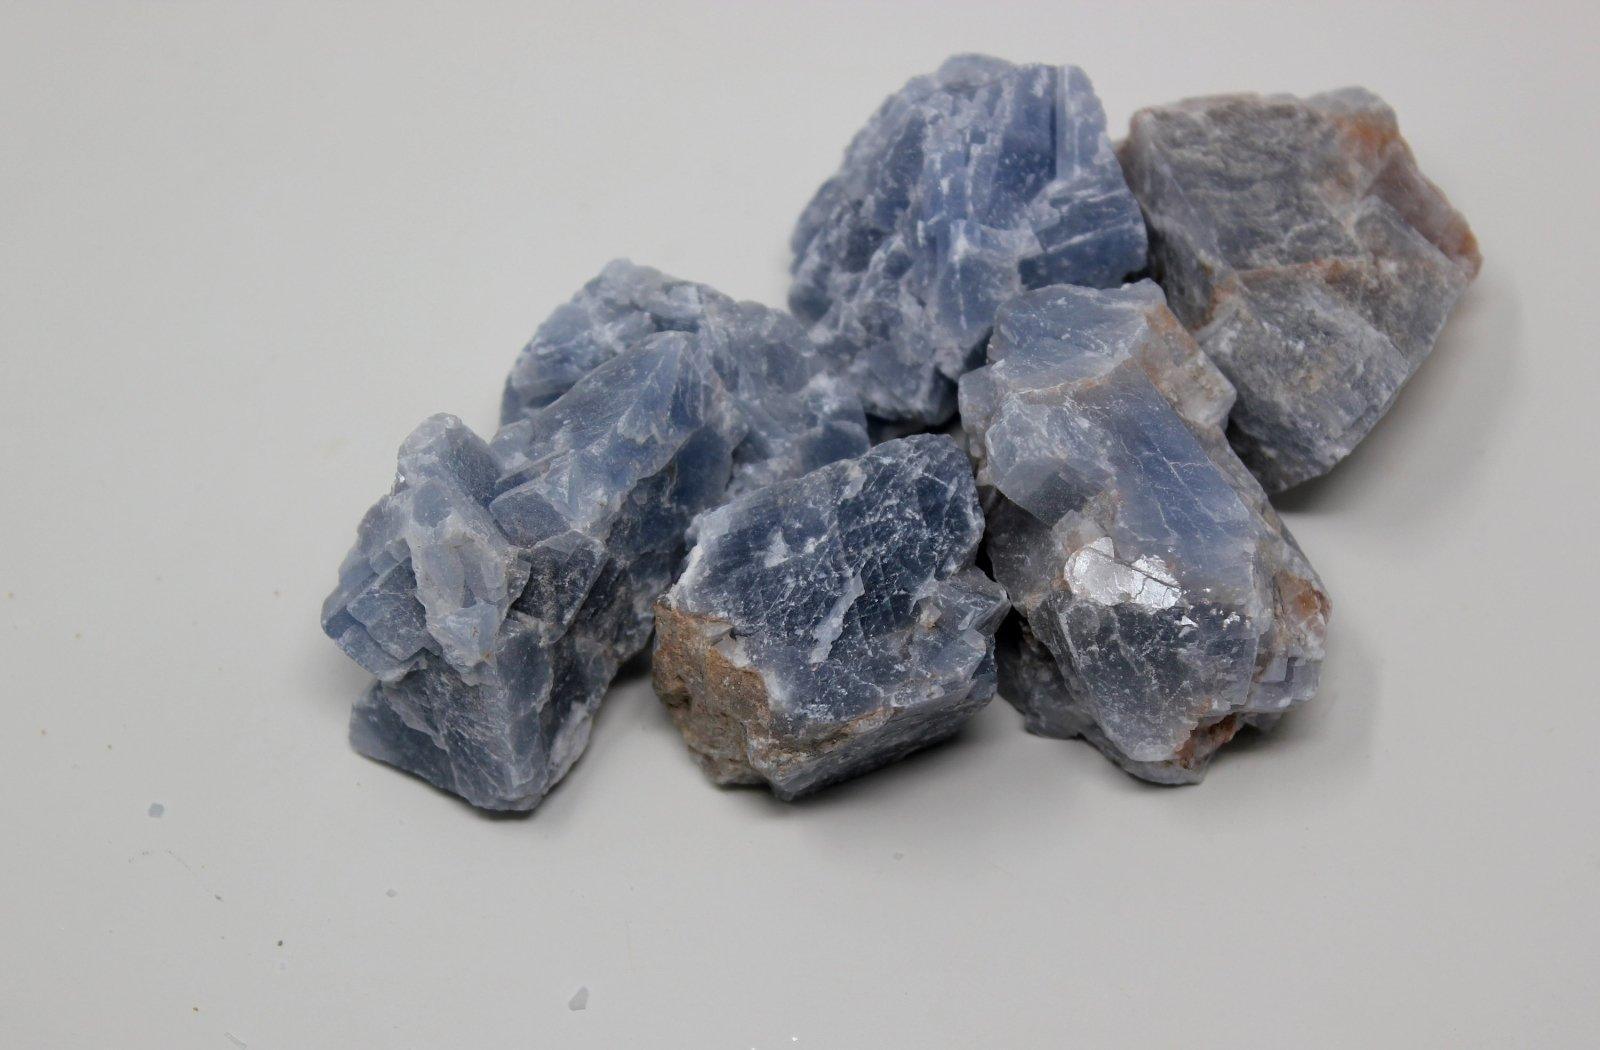 ONE Blue Calcite Crystal! Calcium Carbonate Crystal Formation! - LapidaryCentral